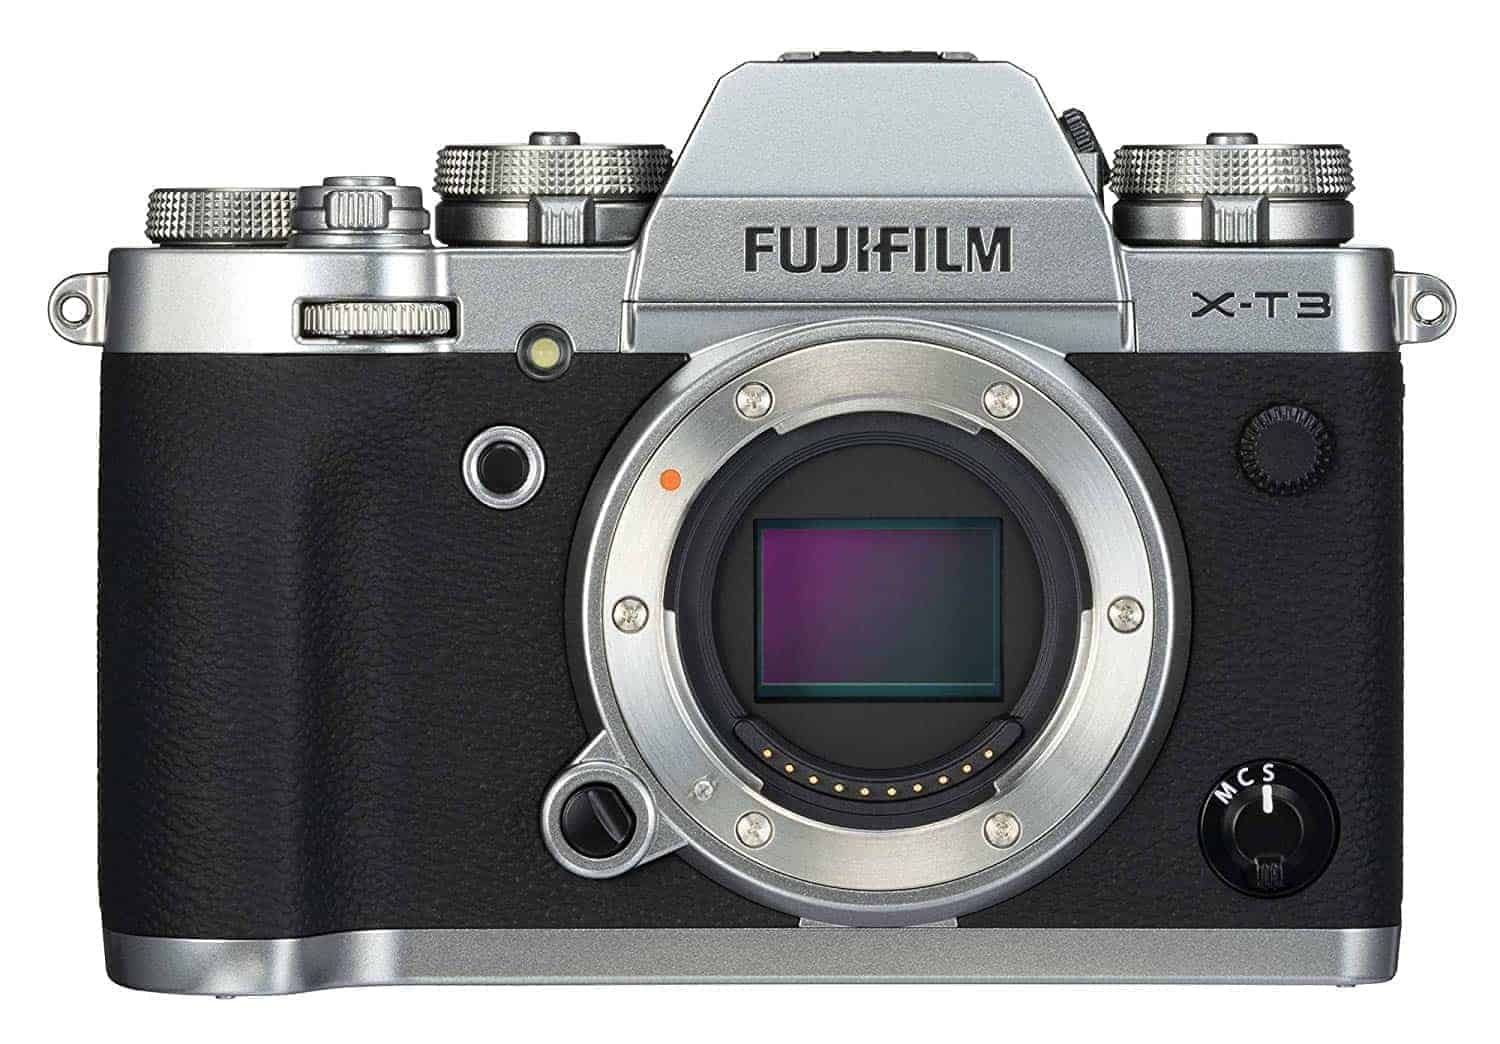 knuffel Correspondent Continent Fujifilm X-T3 Mirrorless Camera: First impressions from a GH5 video shooter  | Stark Insider